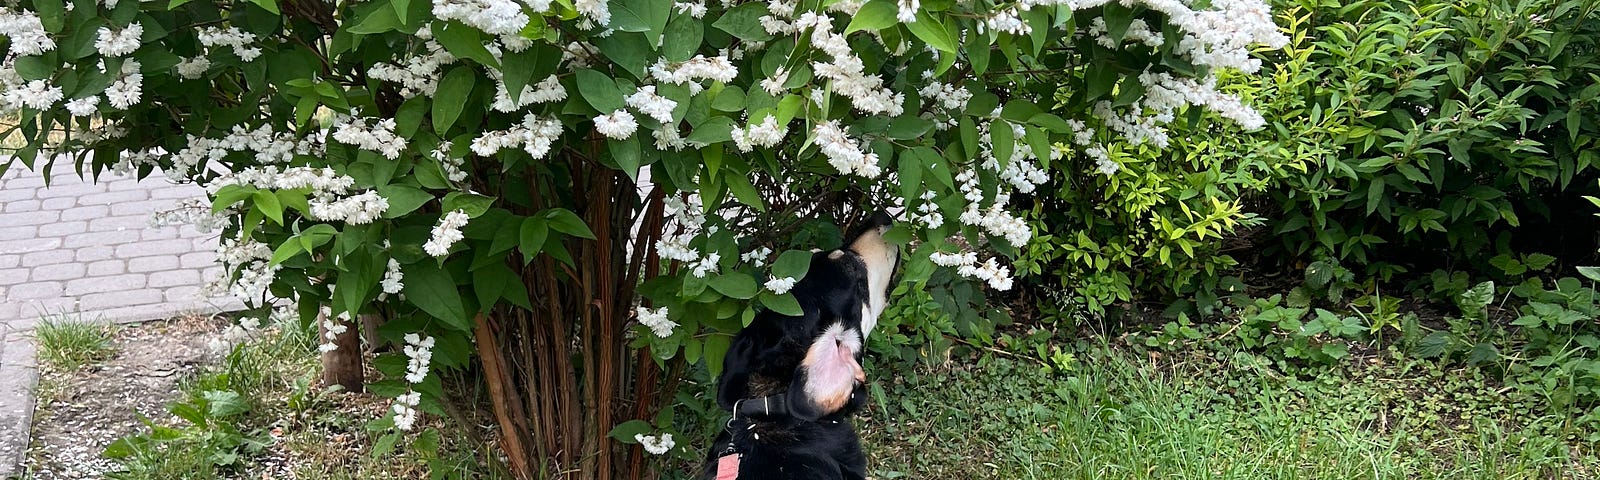 A dog sniffing flowers in the grass.